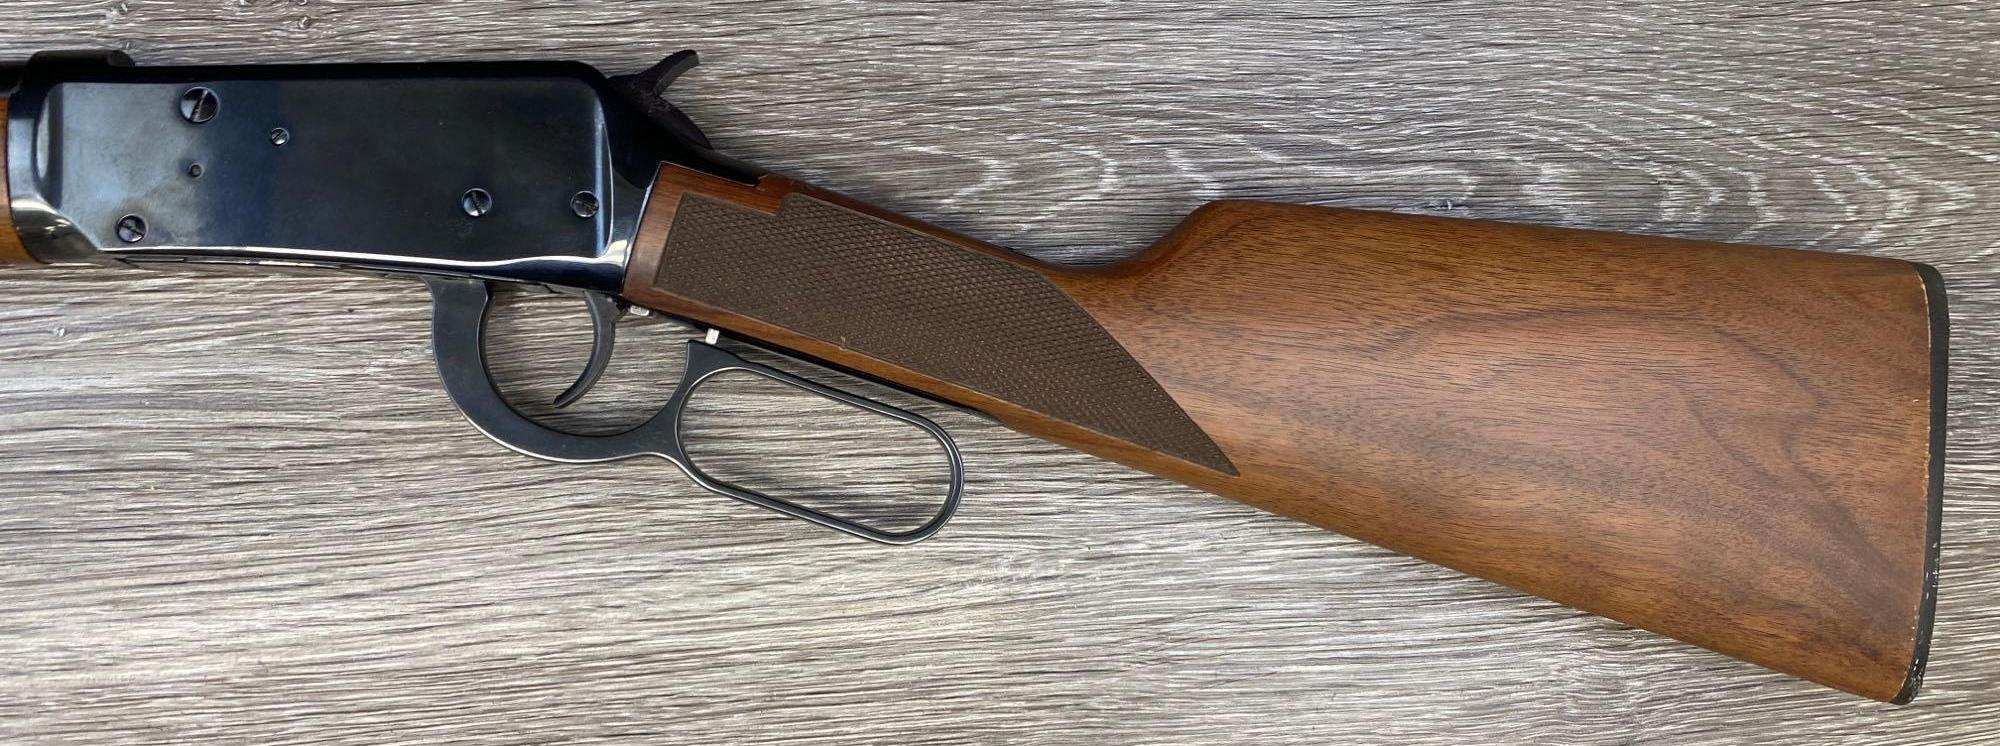 WINCHESTER MODEL 94AE .30-30 LEVER-ACTION CARBINE